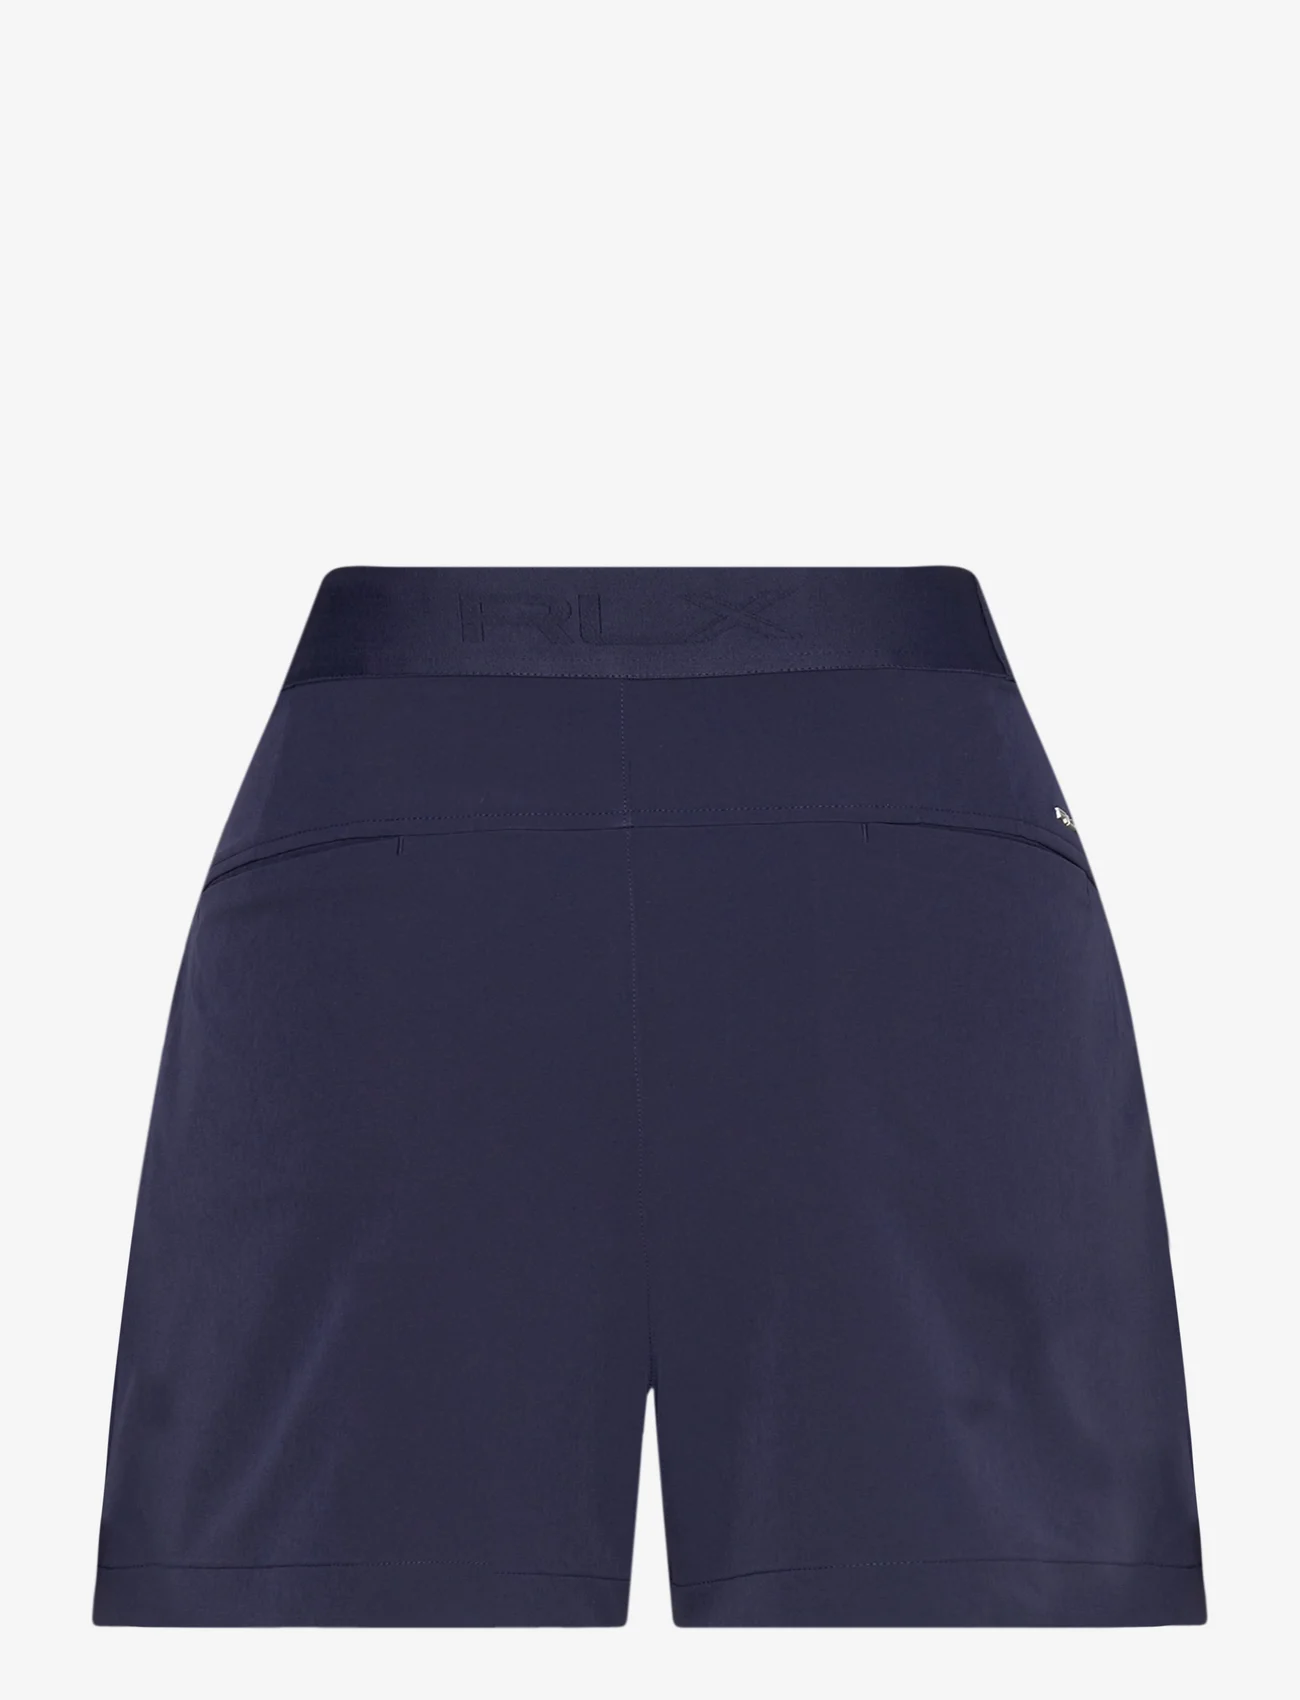 Ralph Lauren Golf - Four-Way-Stretch Pleated Short - robes & jupes - refined navy - 1